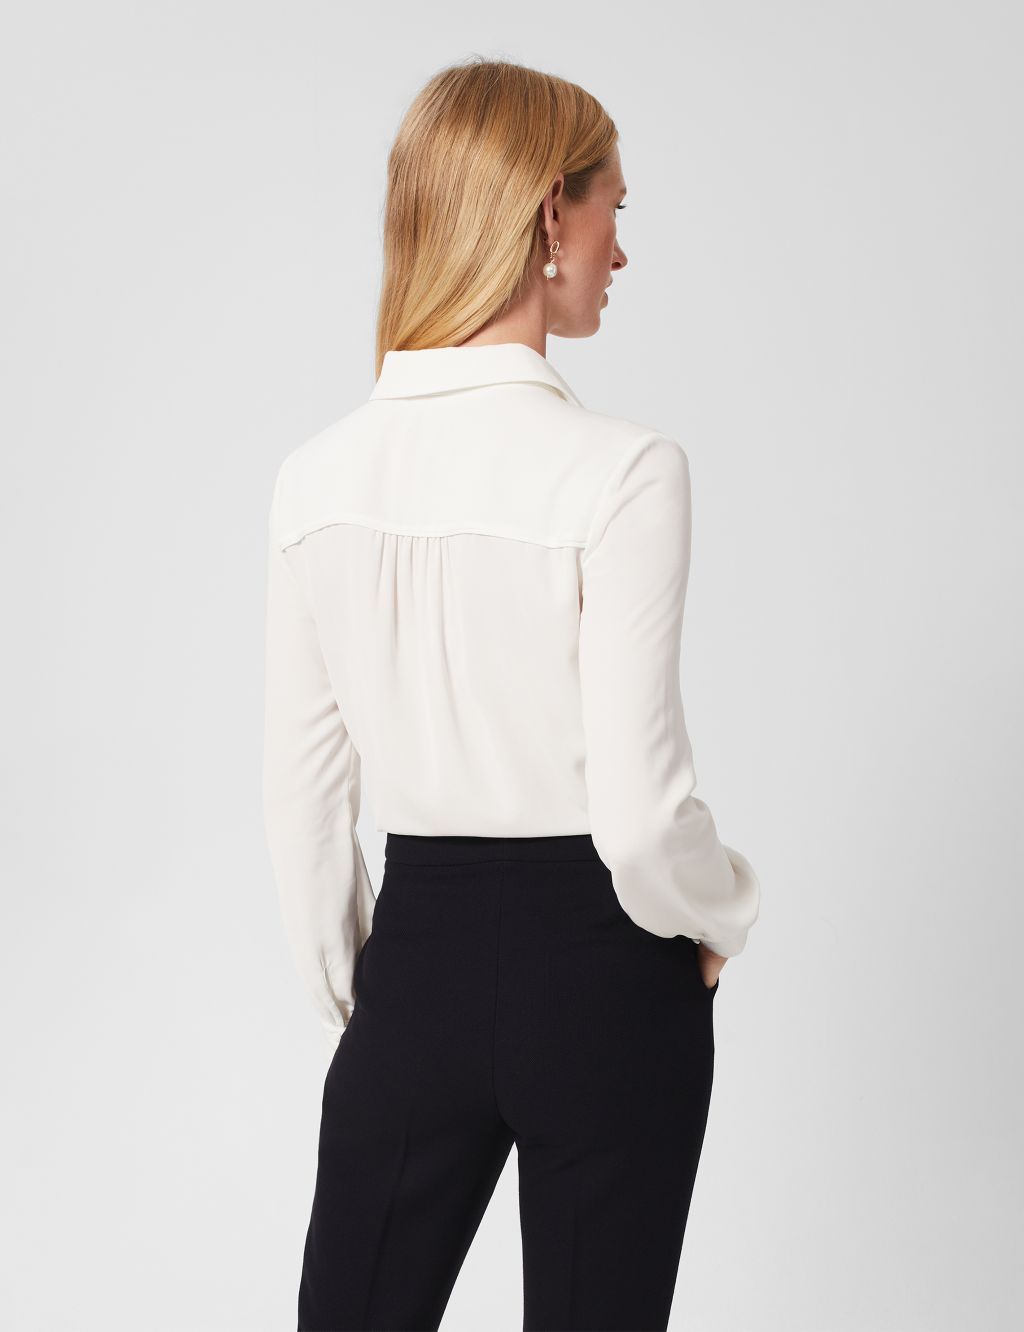 Collared Blouse image 4